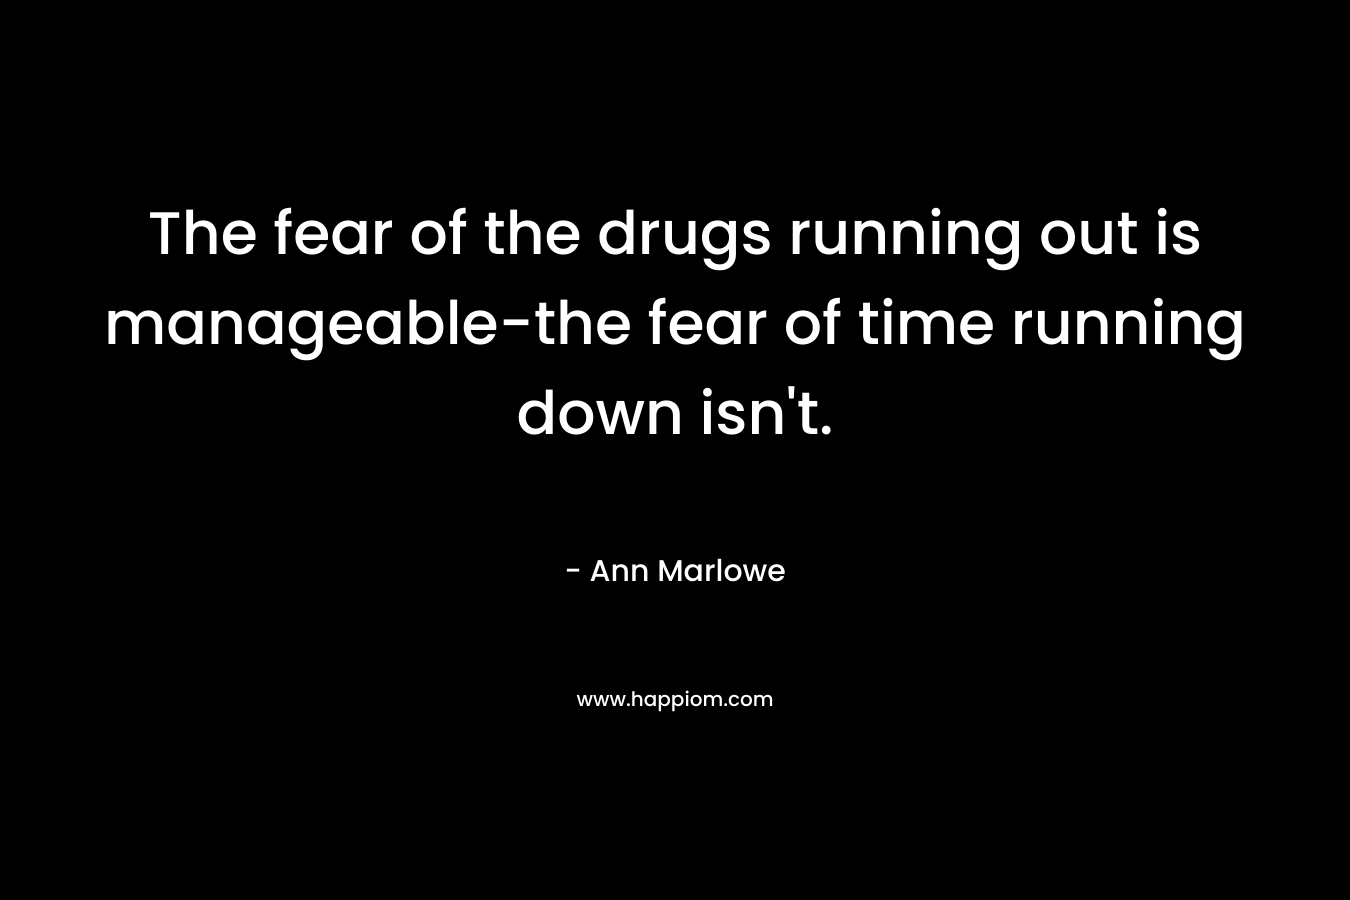 The fear of the drugs running out is manageable-the fear of time running down isn't.